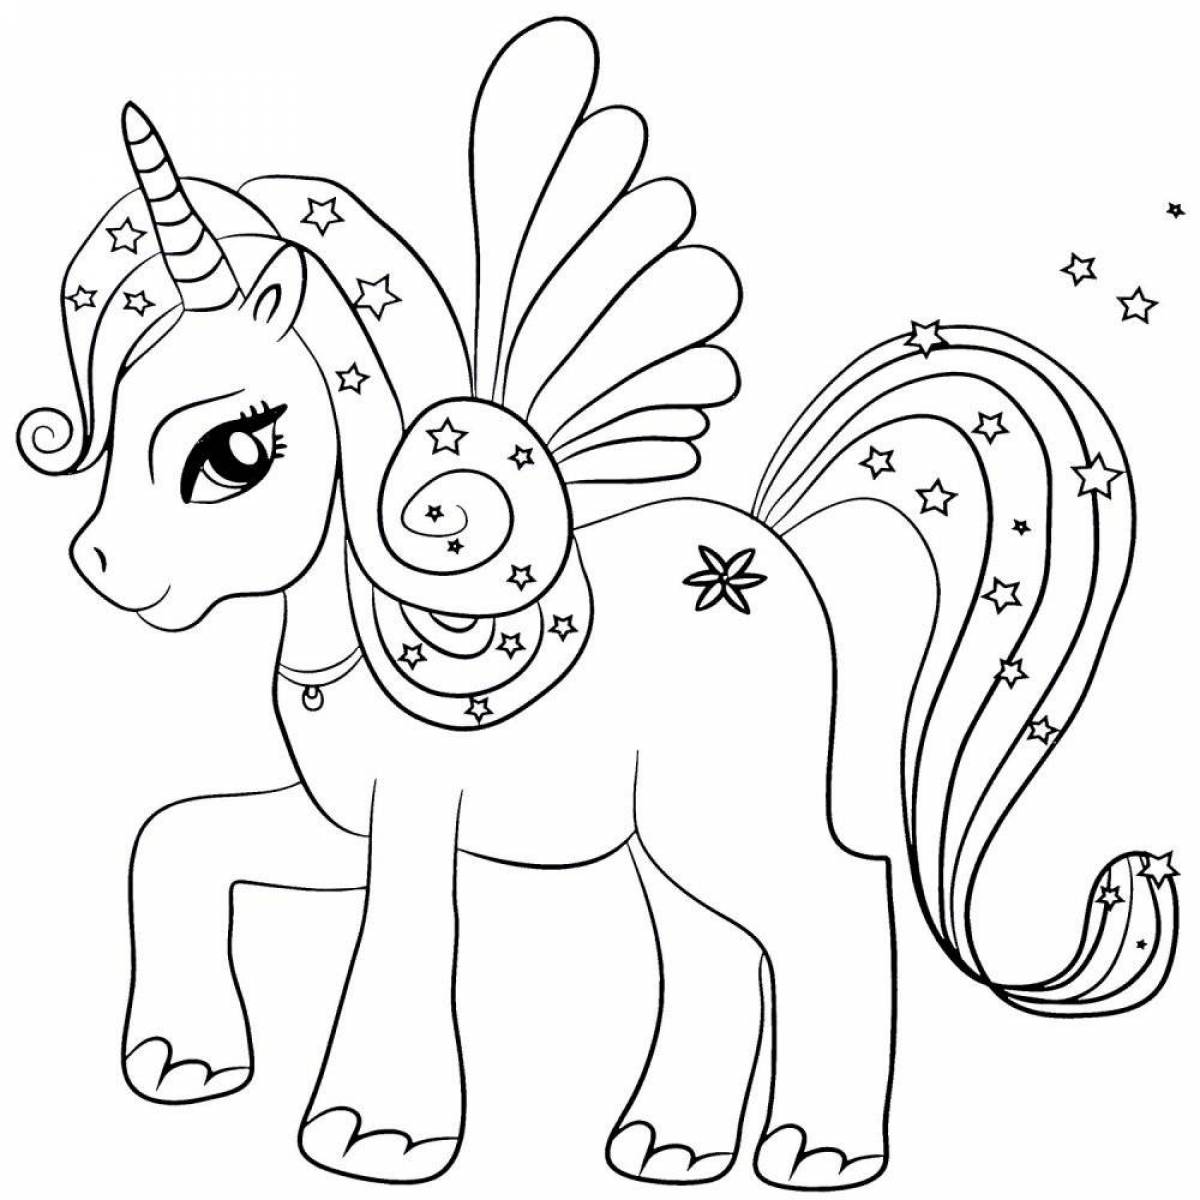 Elegant unicorn coloring book for children 4-5 years old